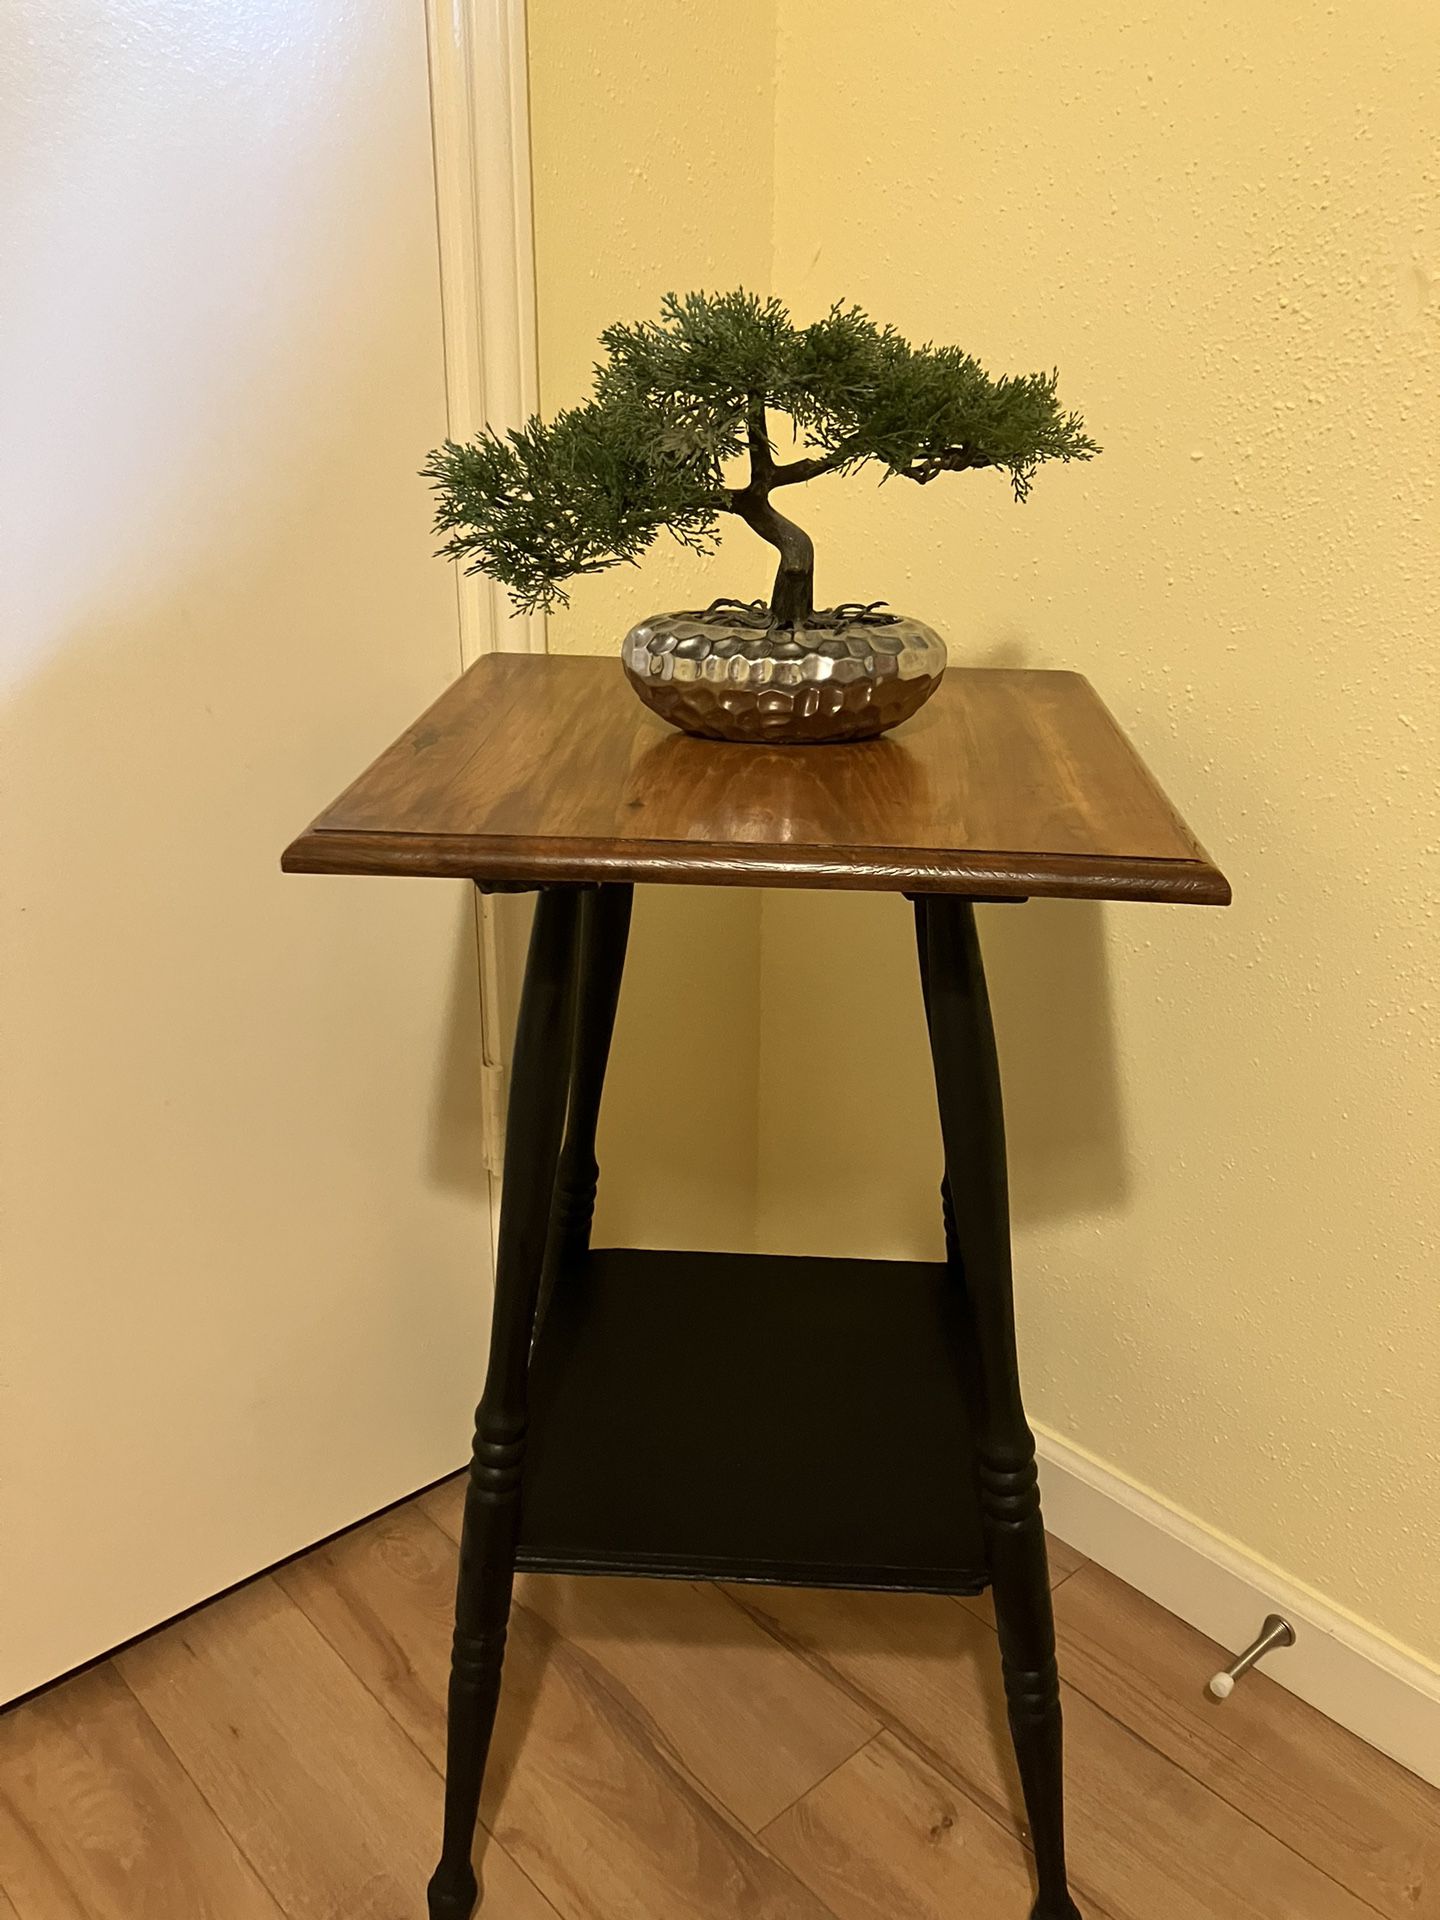 Vintage Side Table/Plant Stand For Sale! 